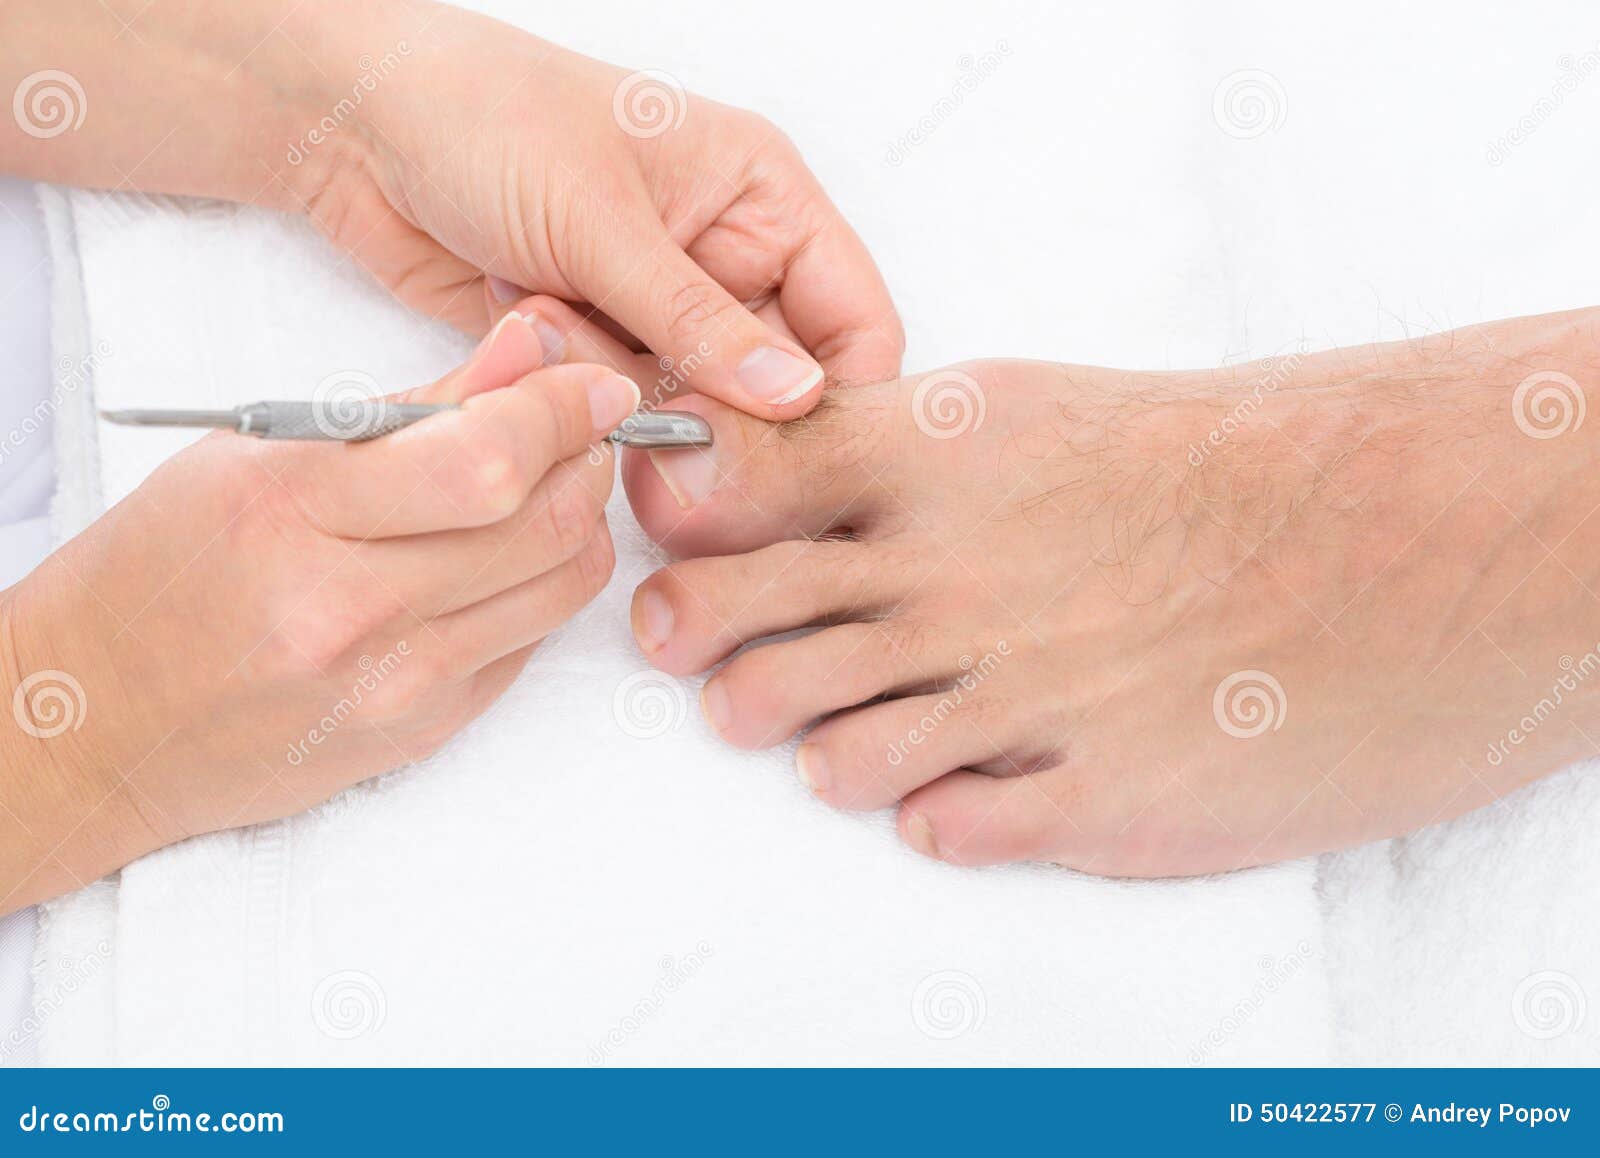 manicurist removing cuticle from the nail